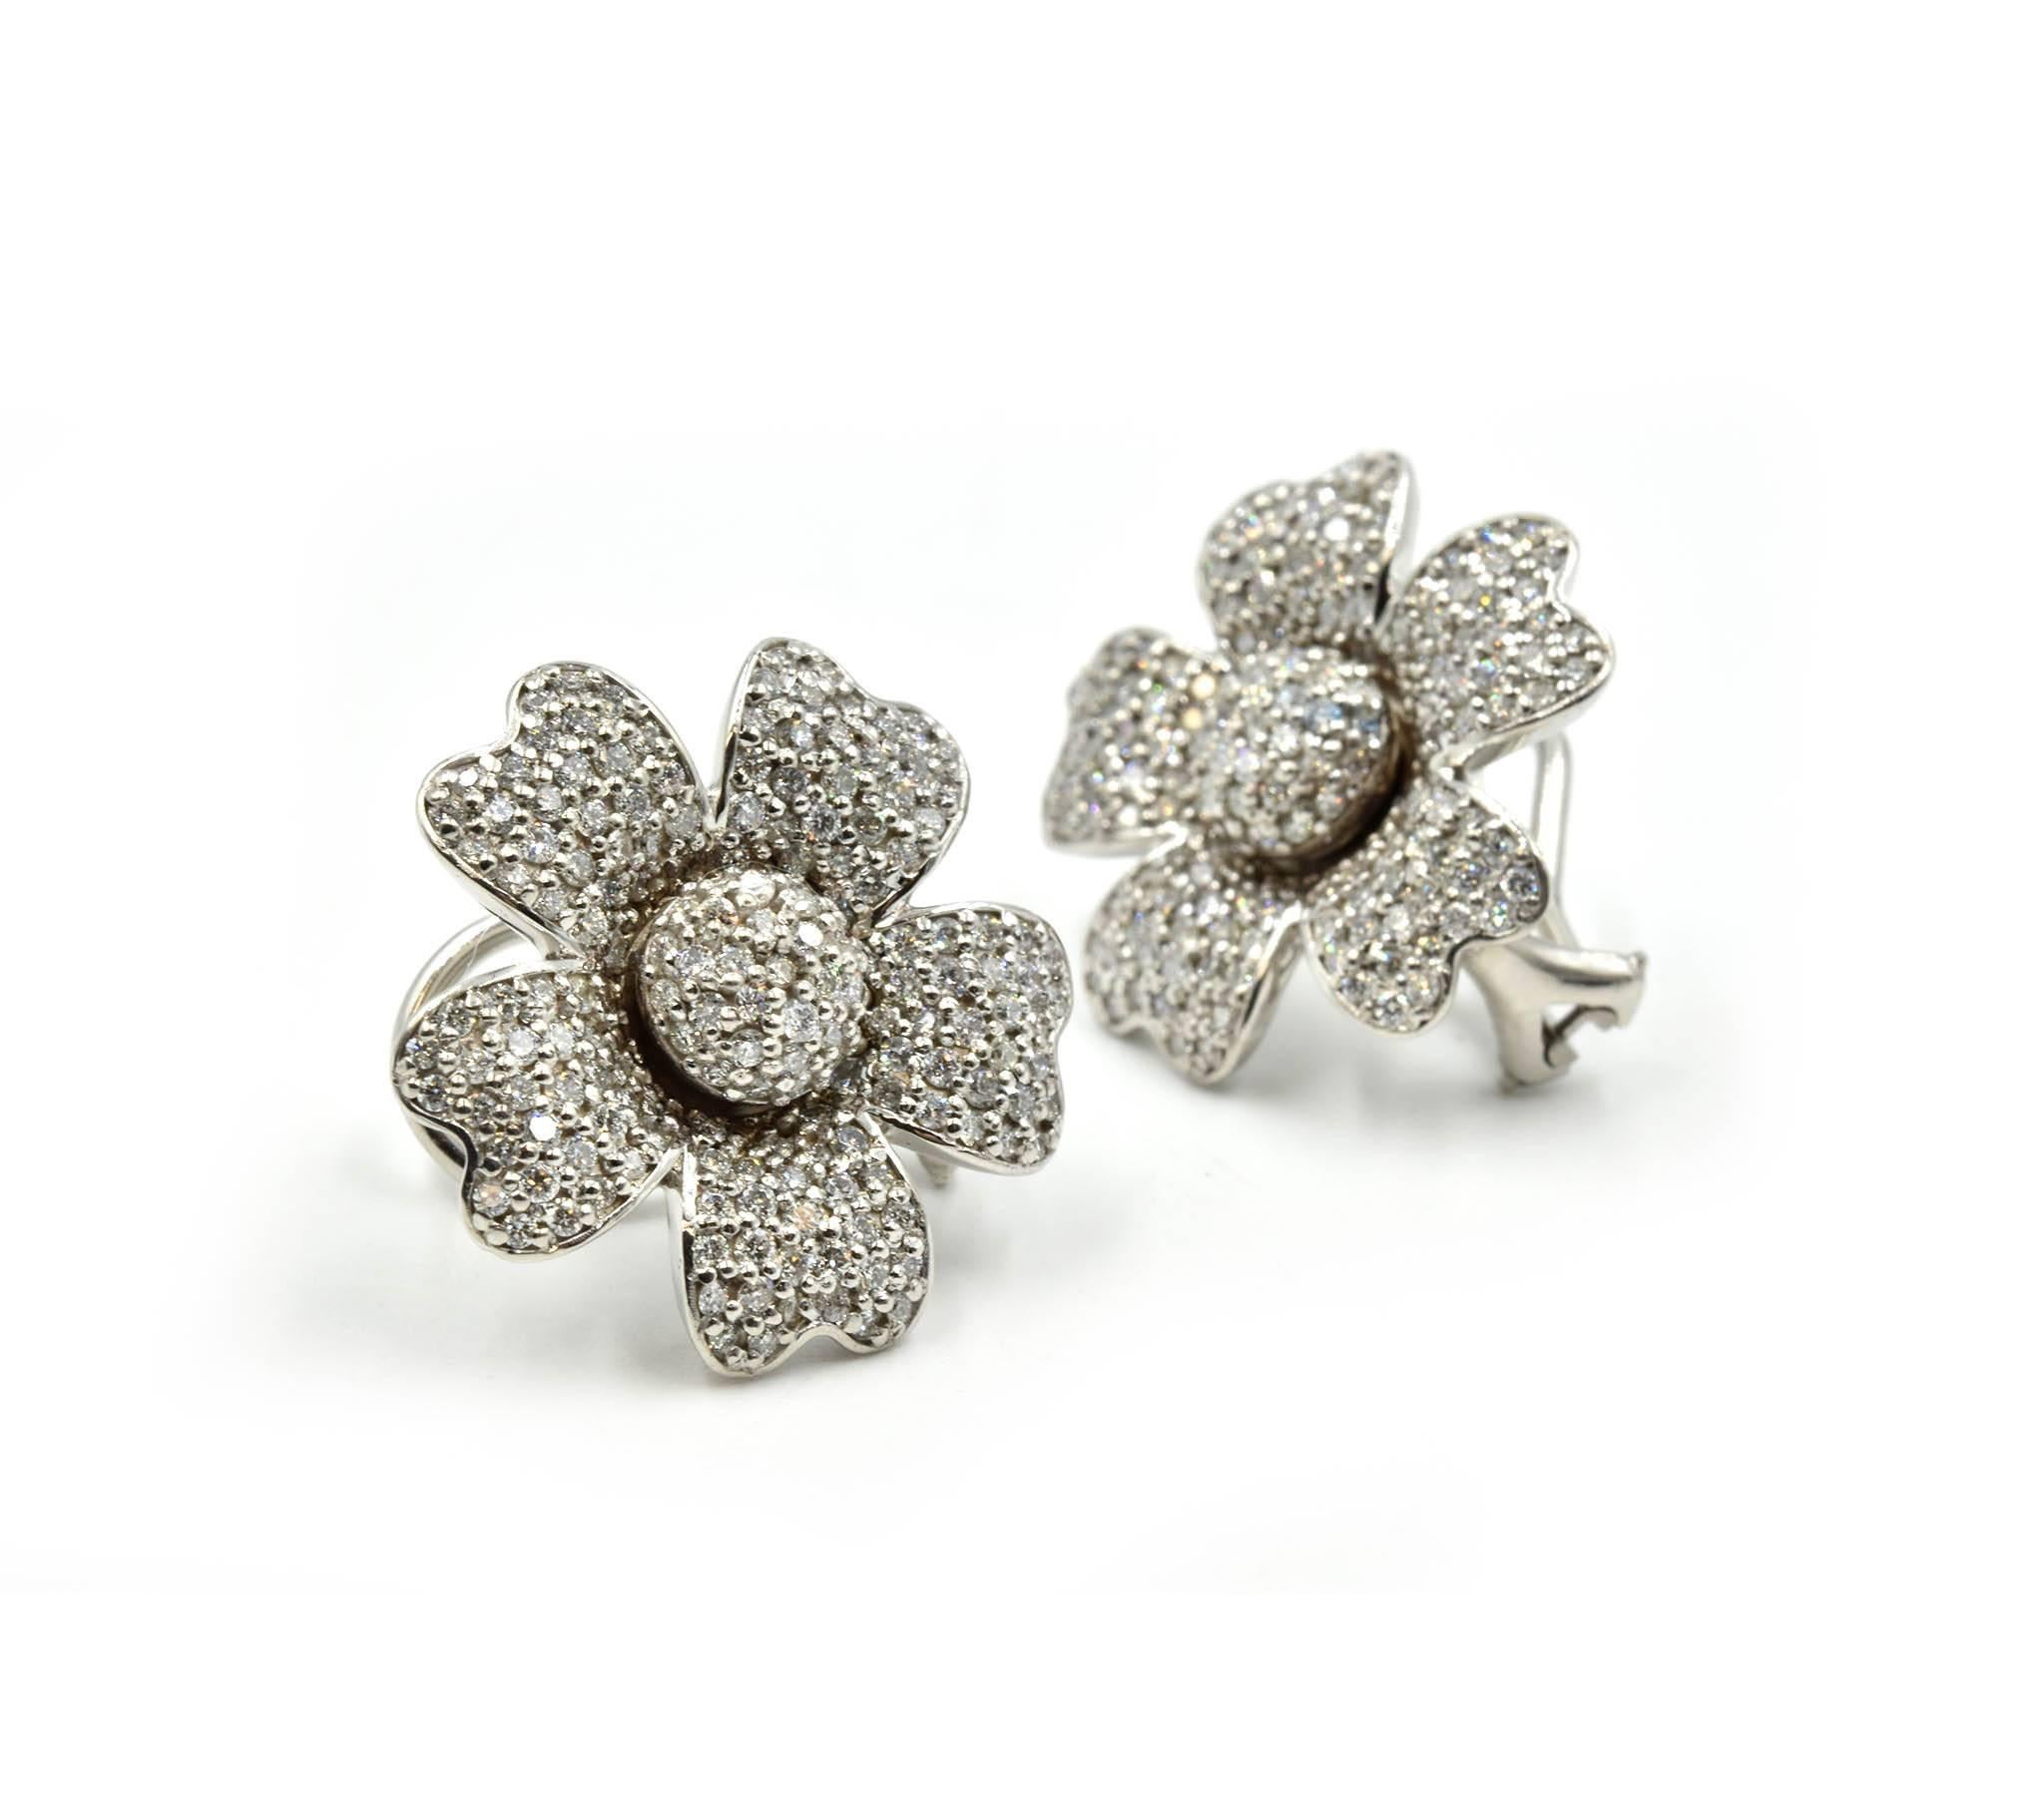 Designer: custom design
Material: 14k white gold
Diamonds: 344 round brilliant cut diamonds = 2.25 carat total weight
Fastenings: omega backs
Dimensions: each earring measures 3/4-inches in length
Weight: 17.60 grams
